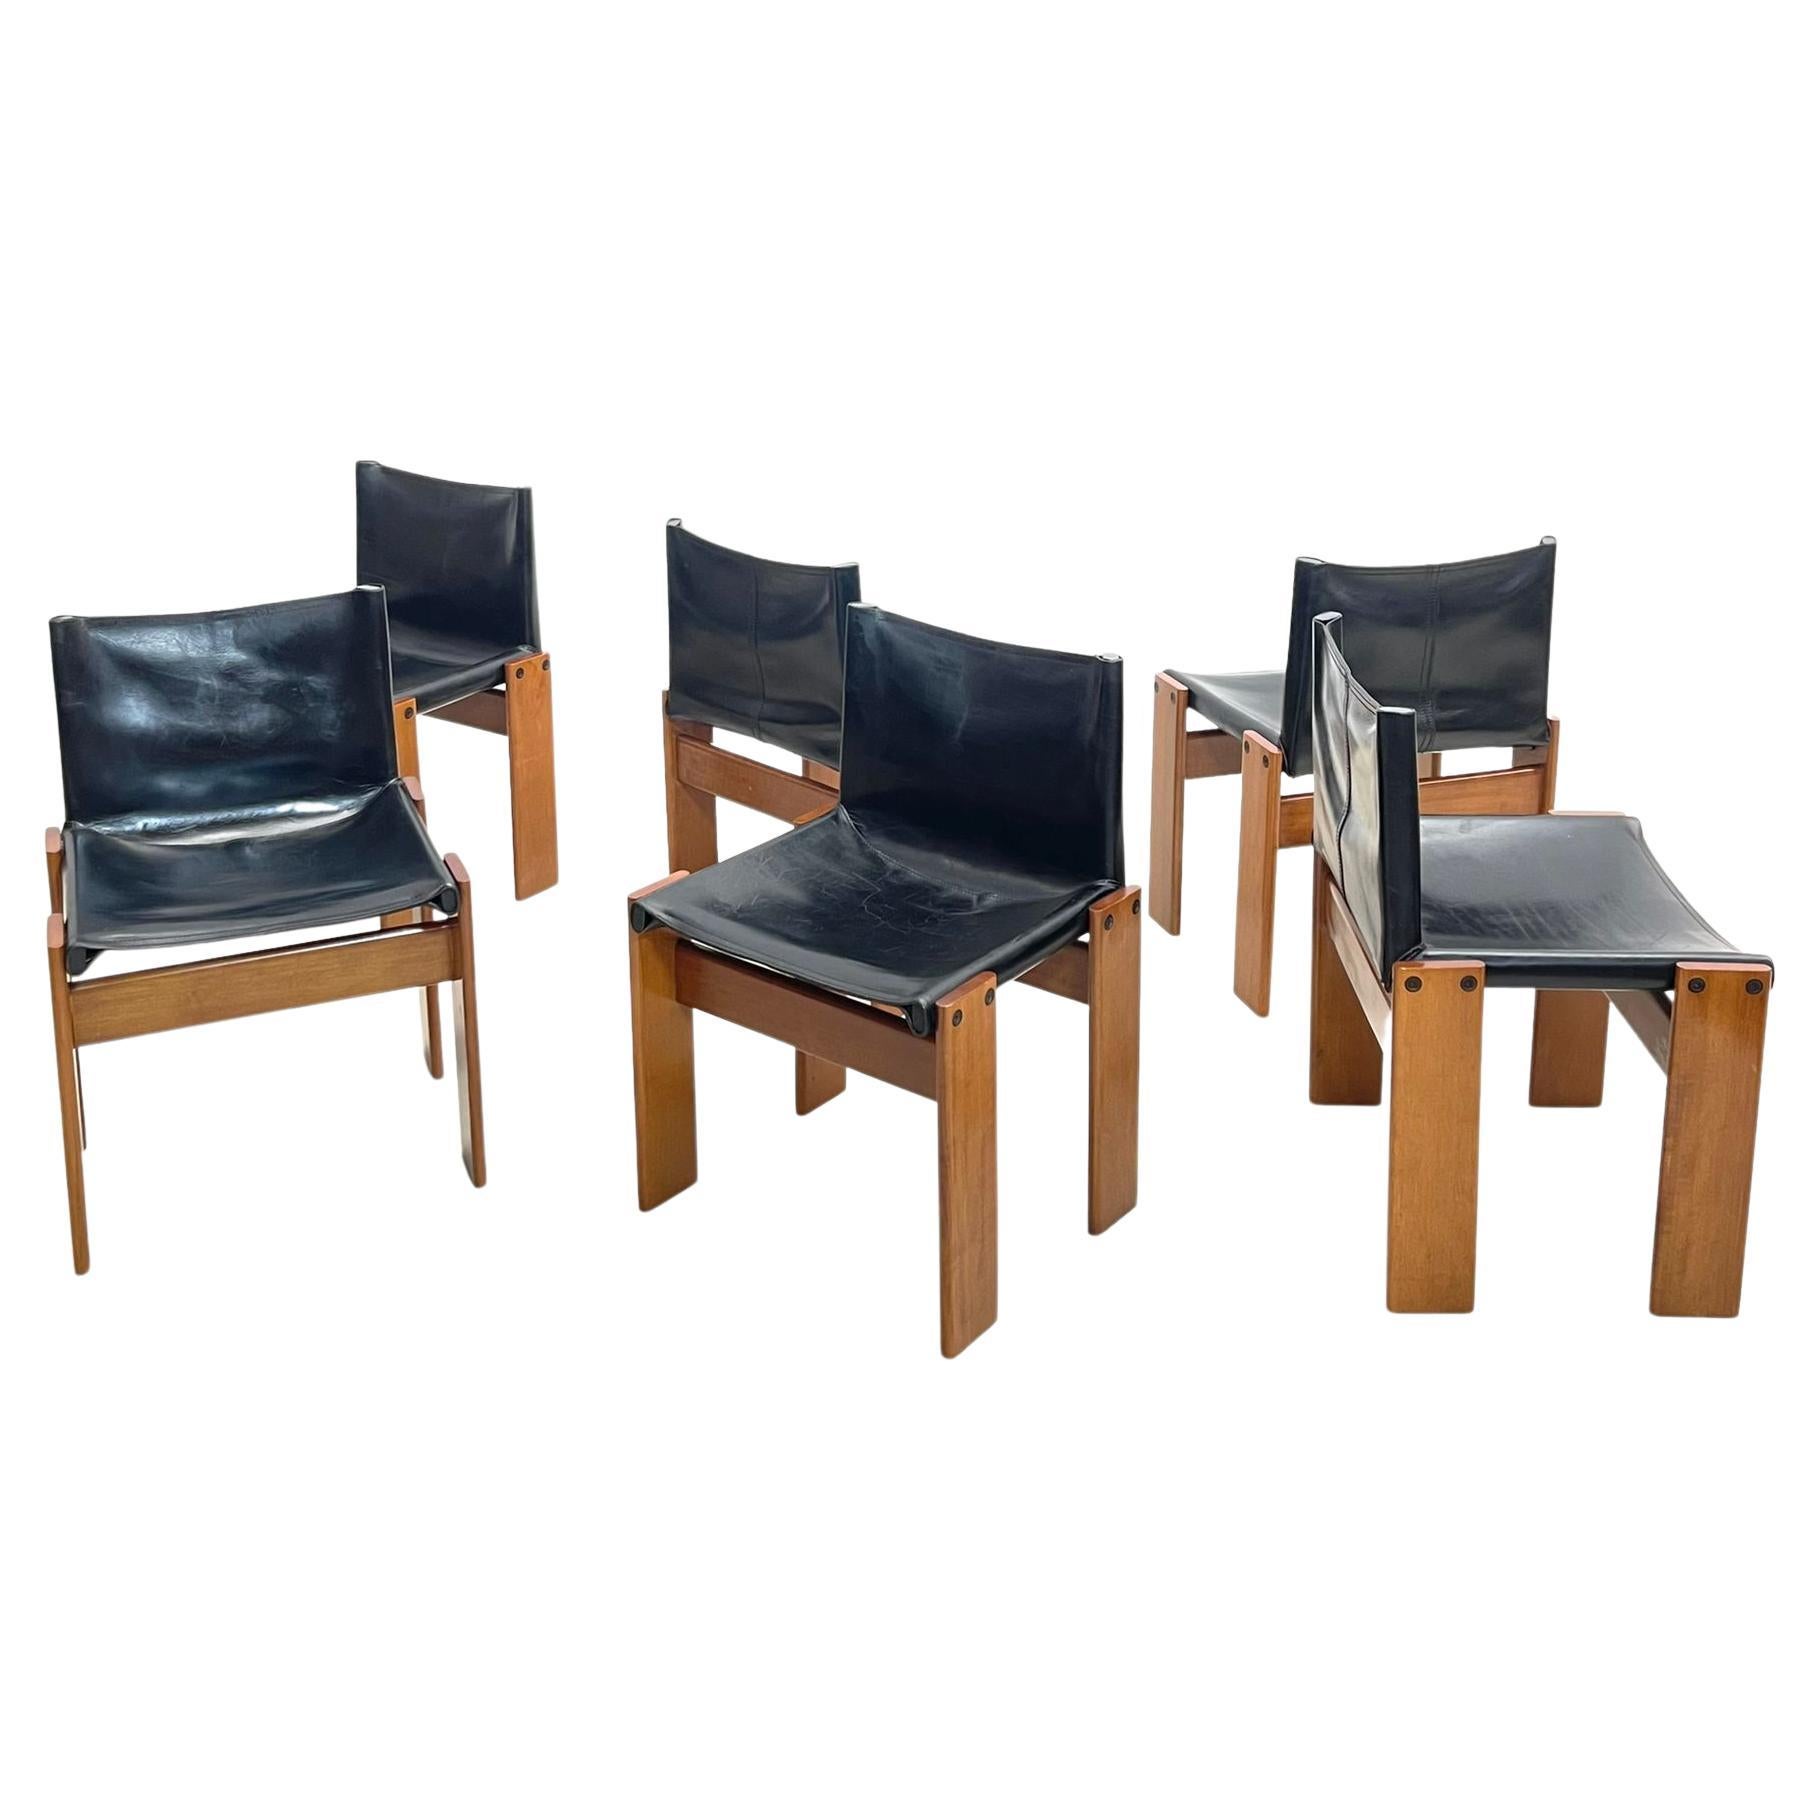 Set of 6 Black Leather Chairs Model "Monk" by Afra and Tobia Scarpa for Molteni For Sale